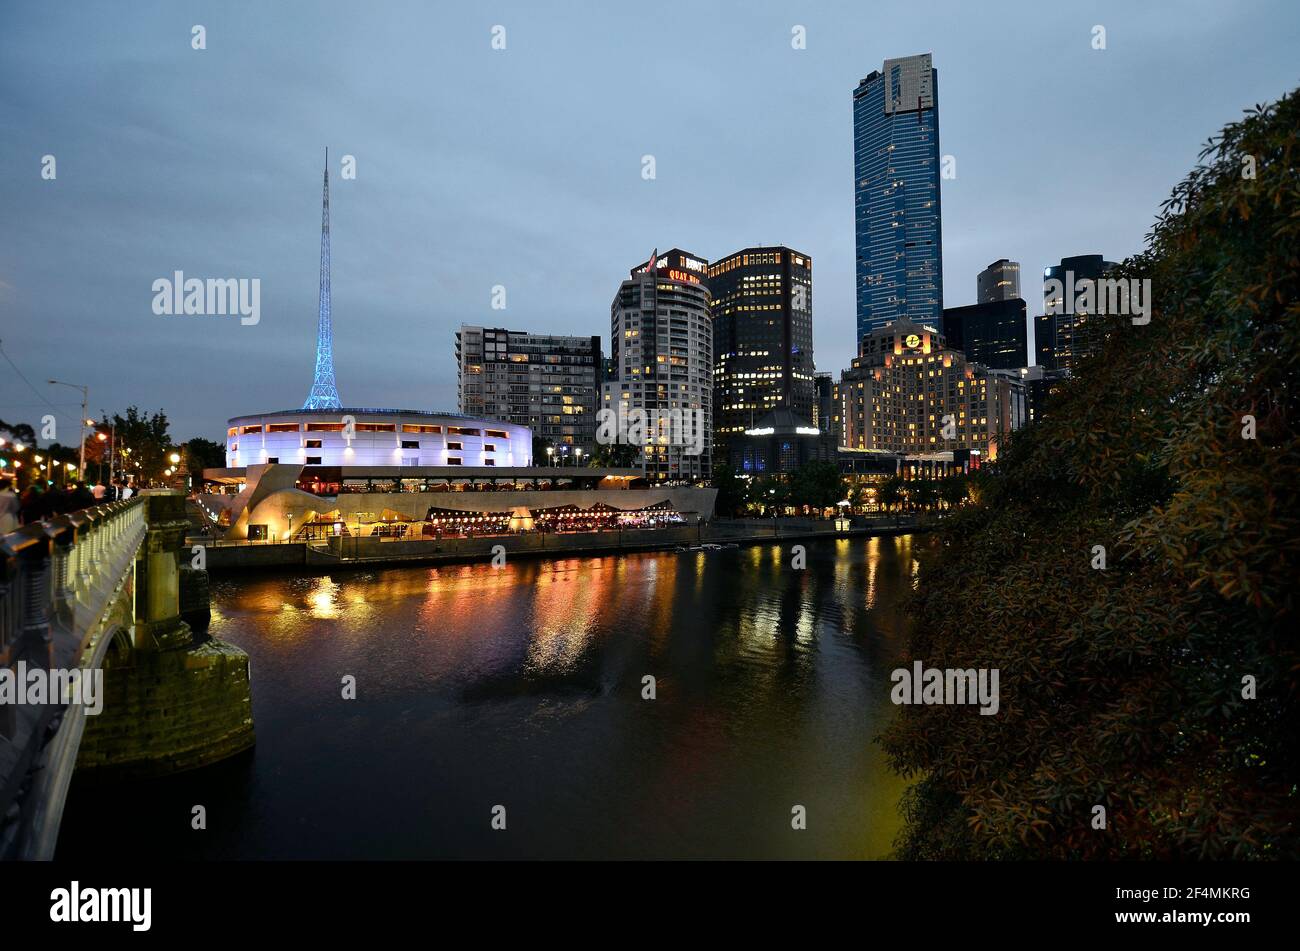 Melbourne, VIC, Australia - November 05, 2017: Night scene with illuminated buildings on Southbank of Yarra river Stock Photo